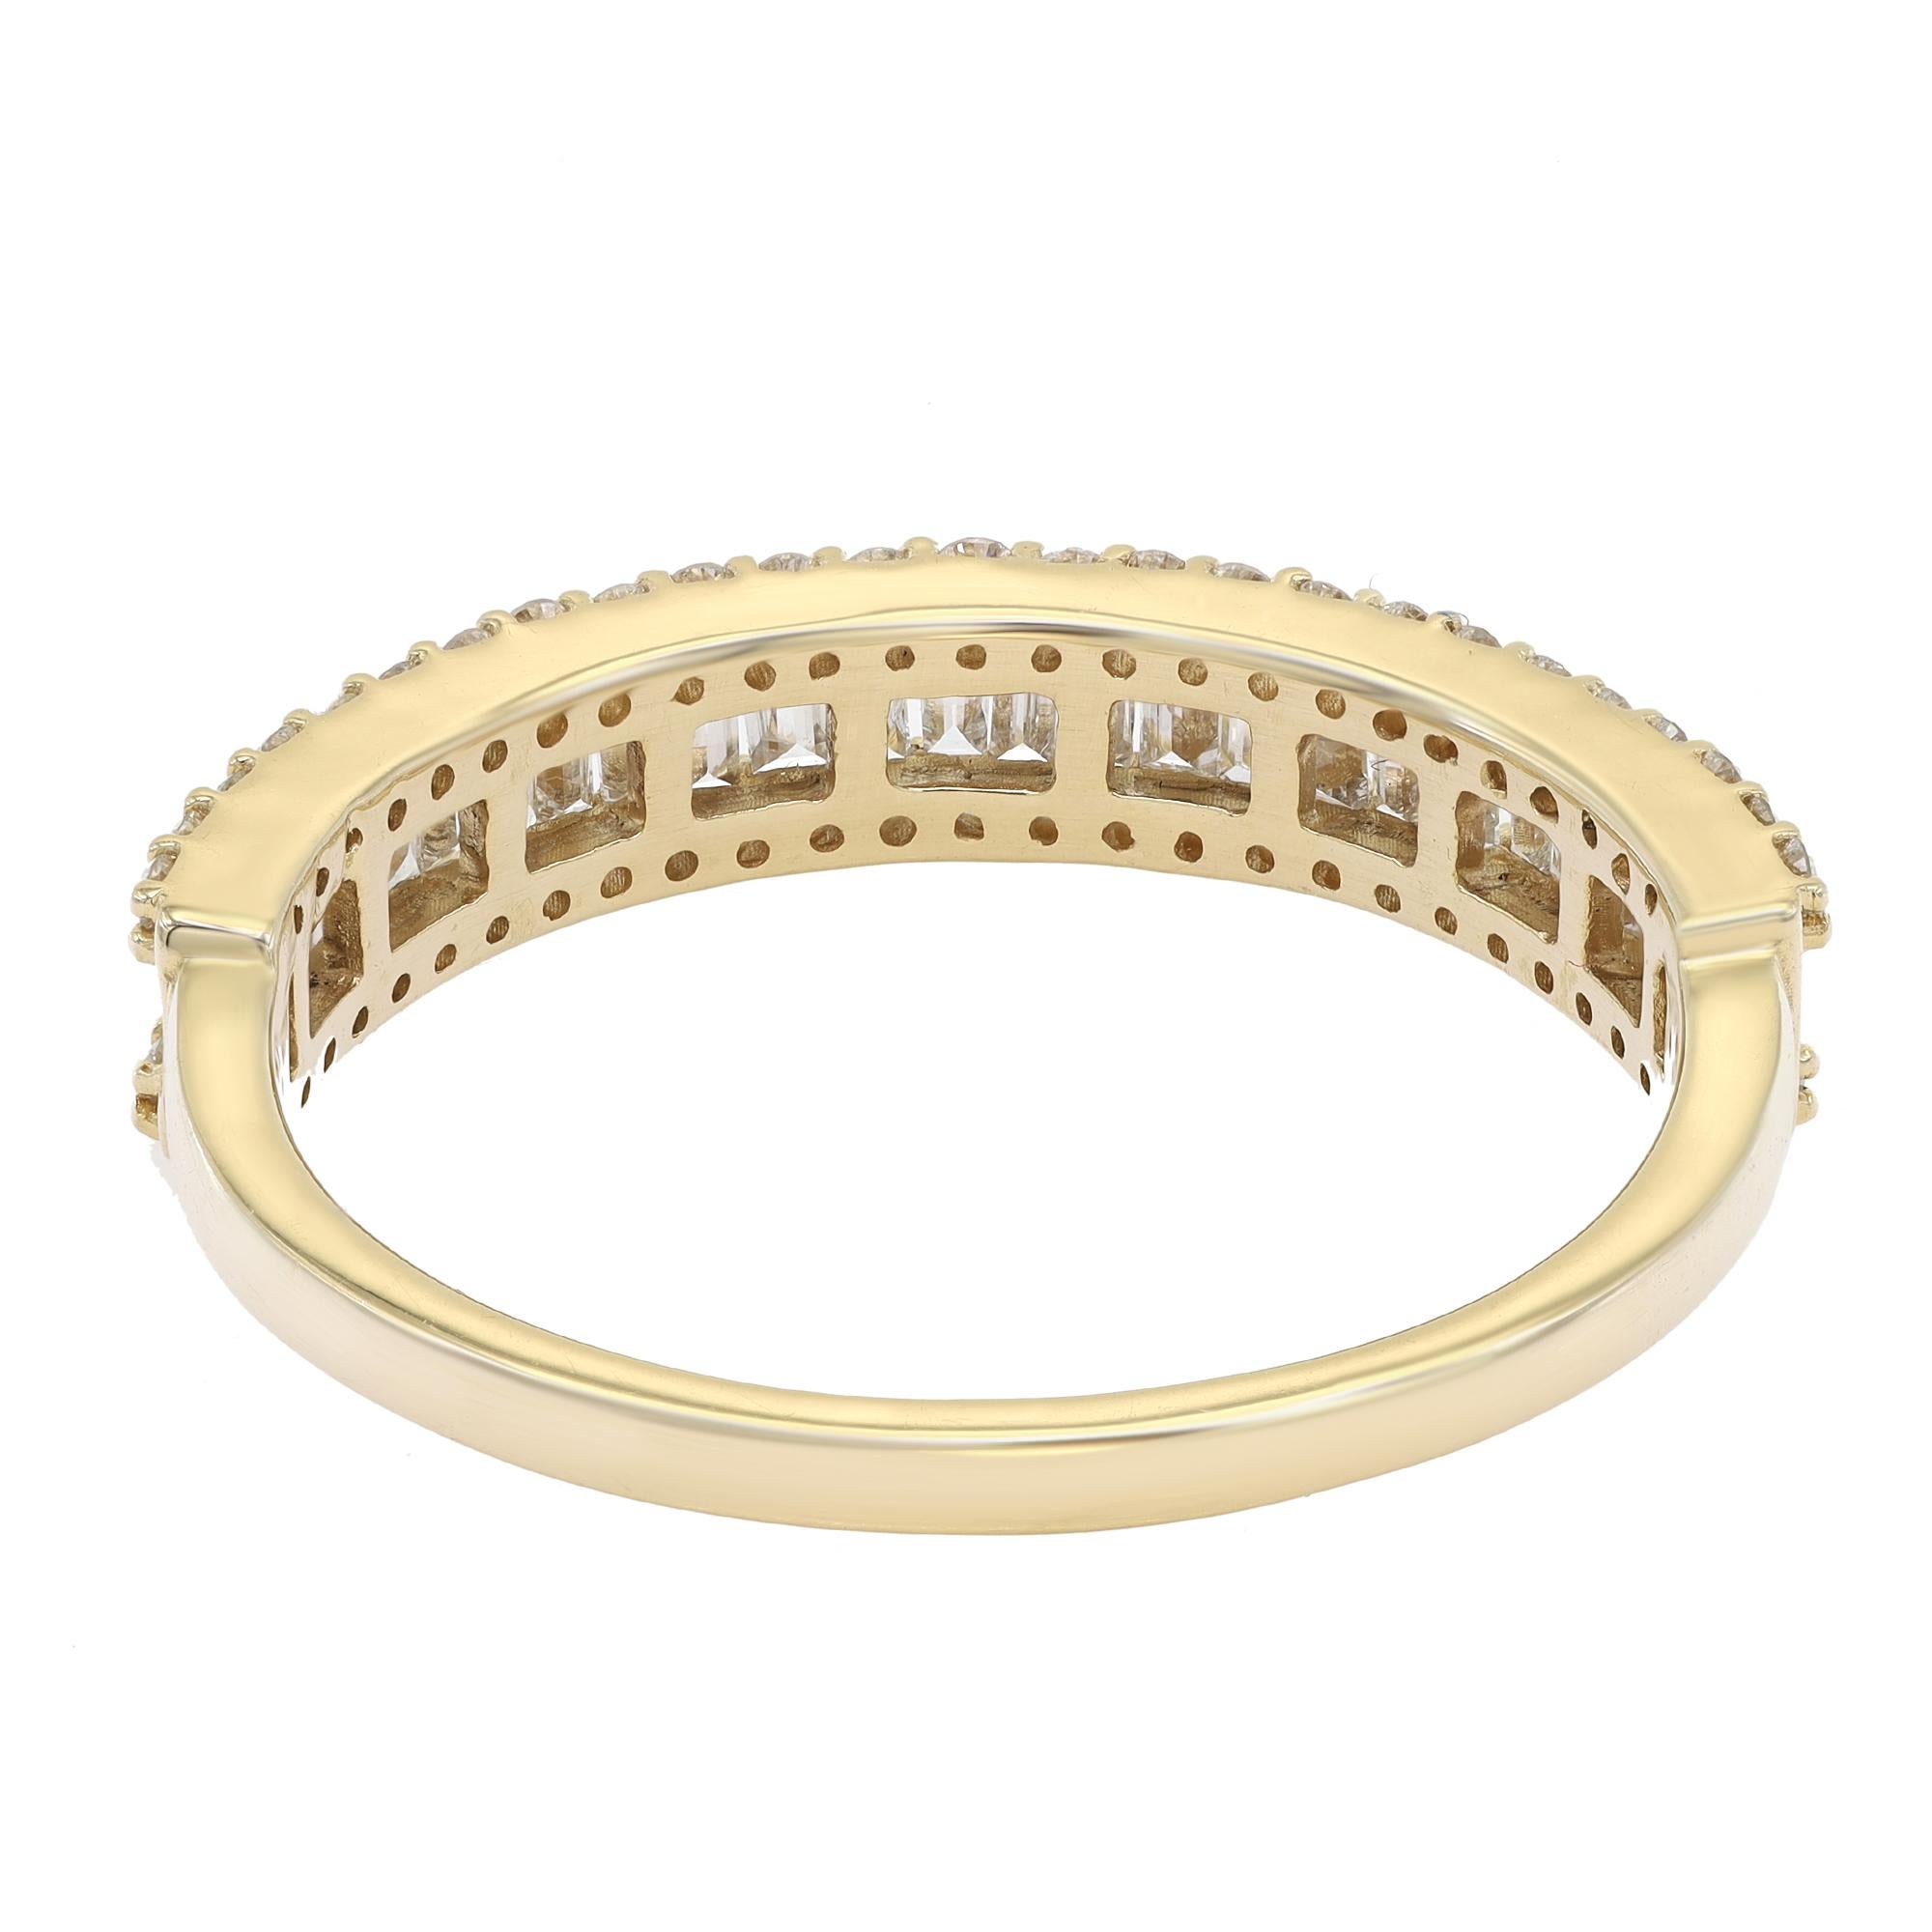 Modern Baguette Round Cut Diamond Wedding Band Ring 14K Yellow Gold 0.47cttw For Sale